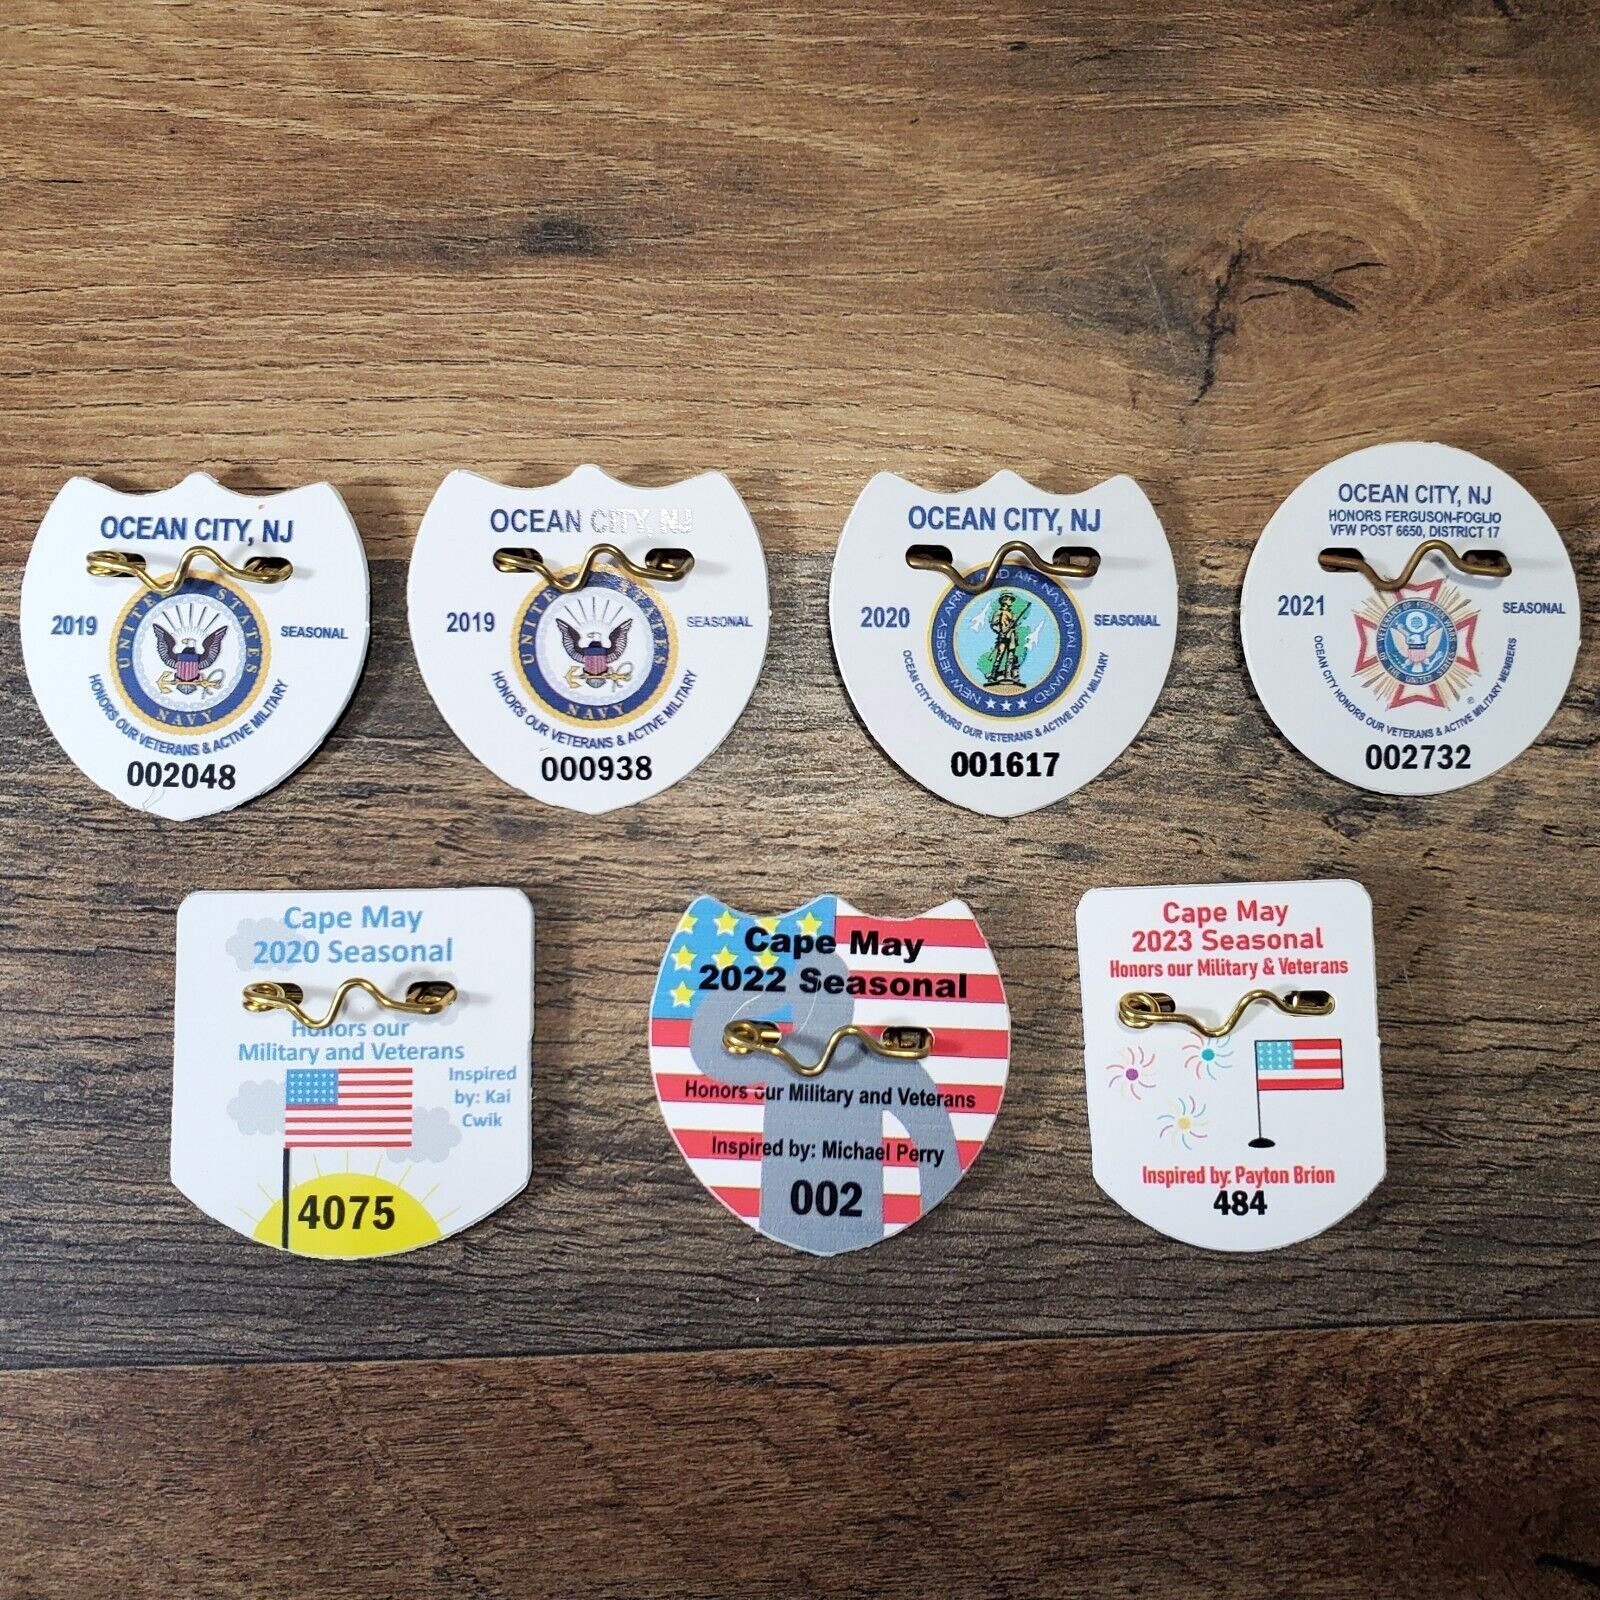 Ocean City and Cape May New Jersey Lot of 7 Seasonal Military Beach Tags